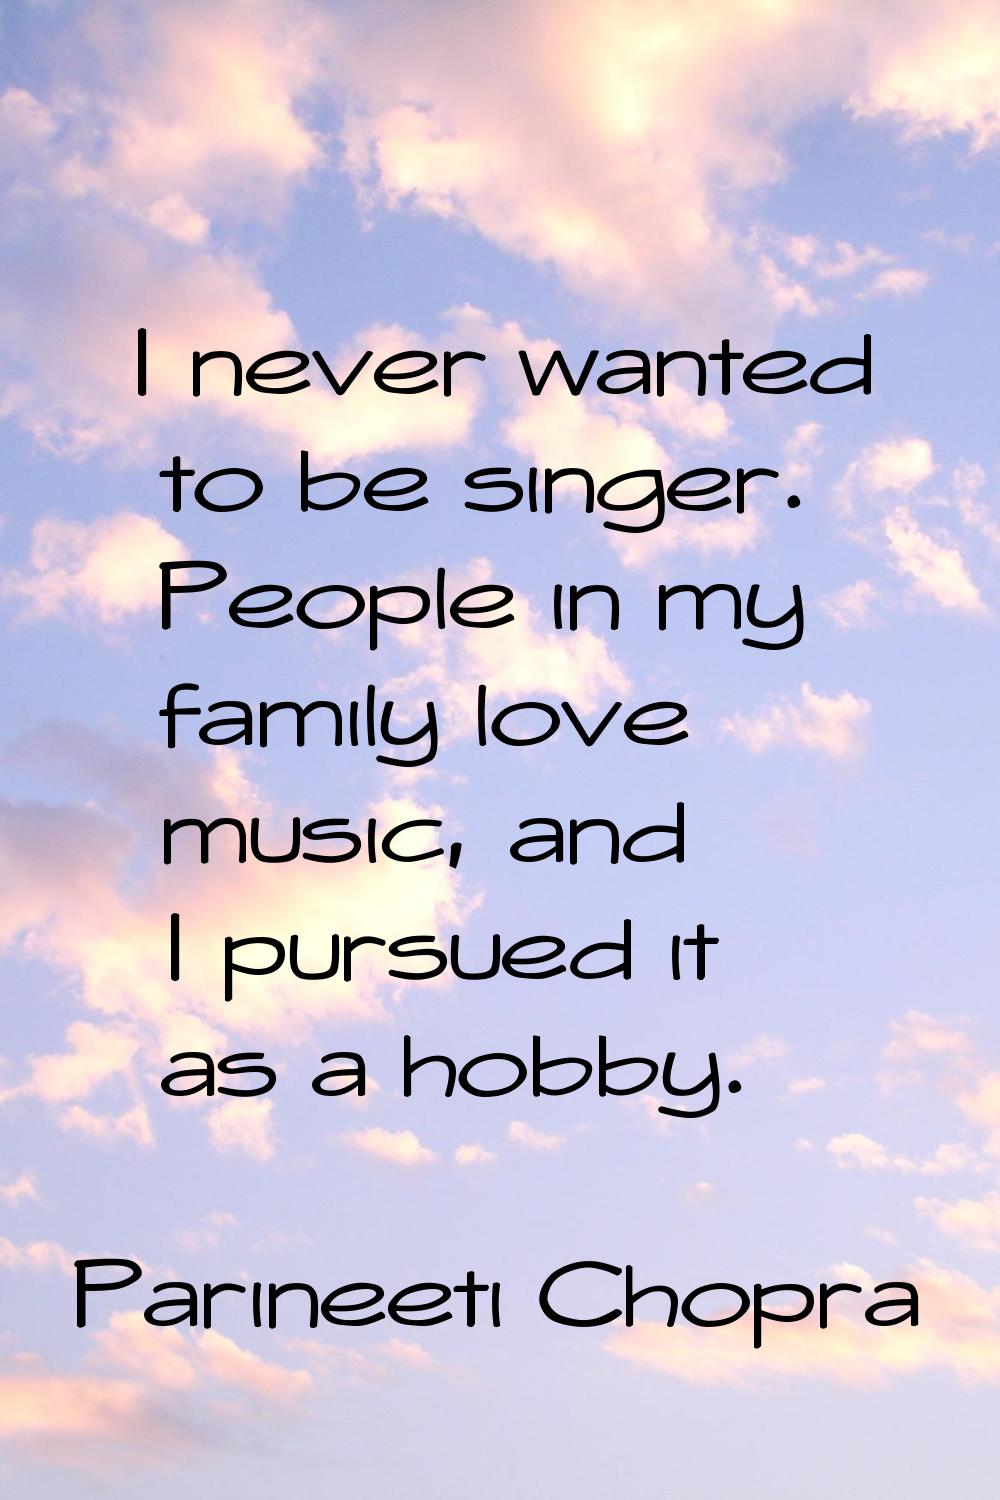 I never wanted to be singer. People in my family love music, and I pursued it as a hobby.